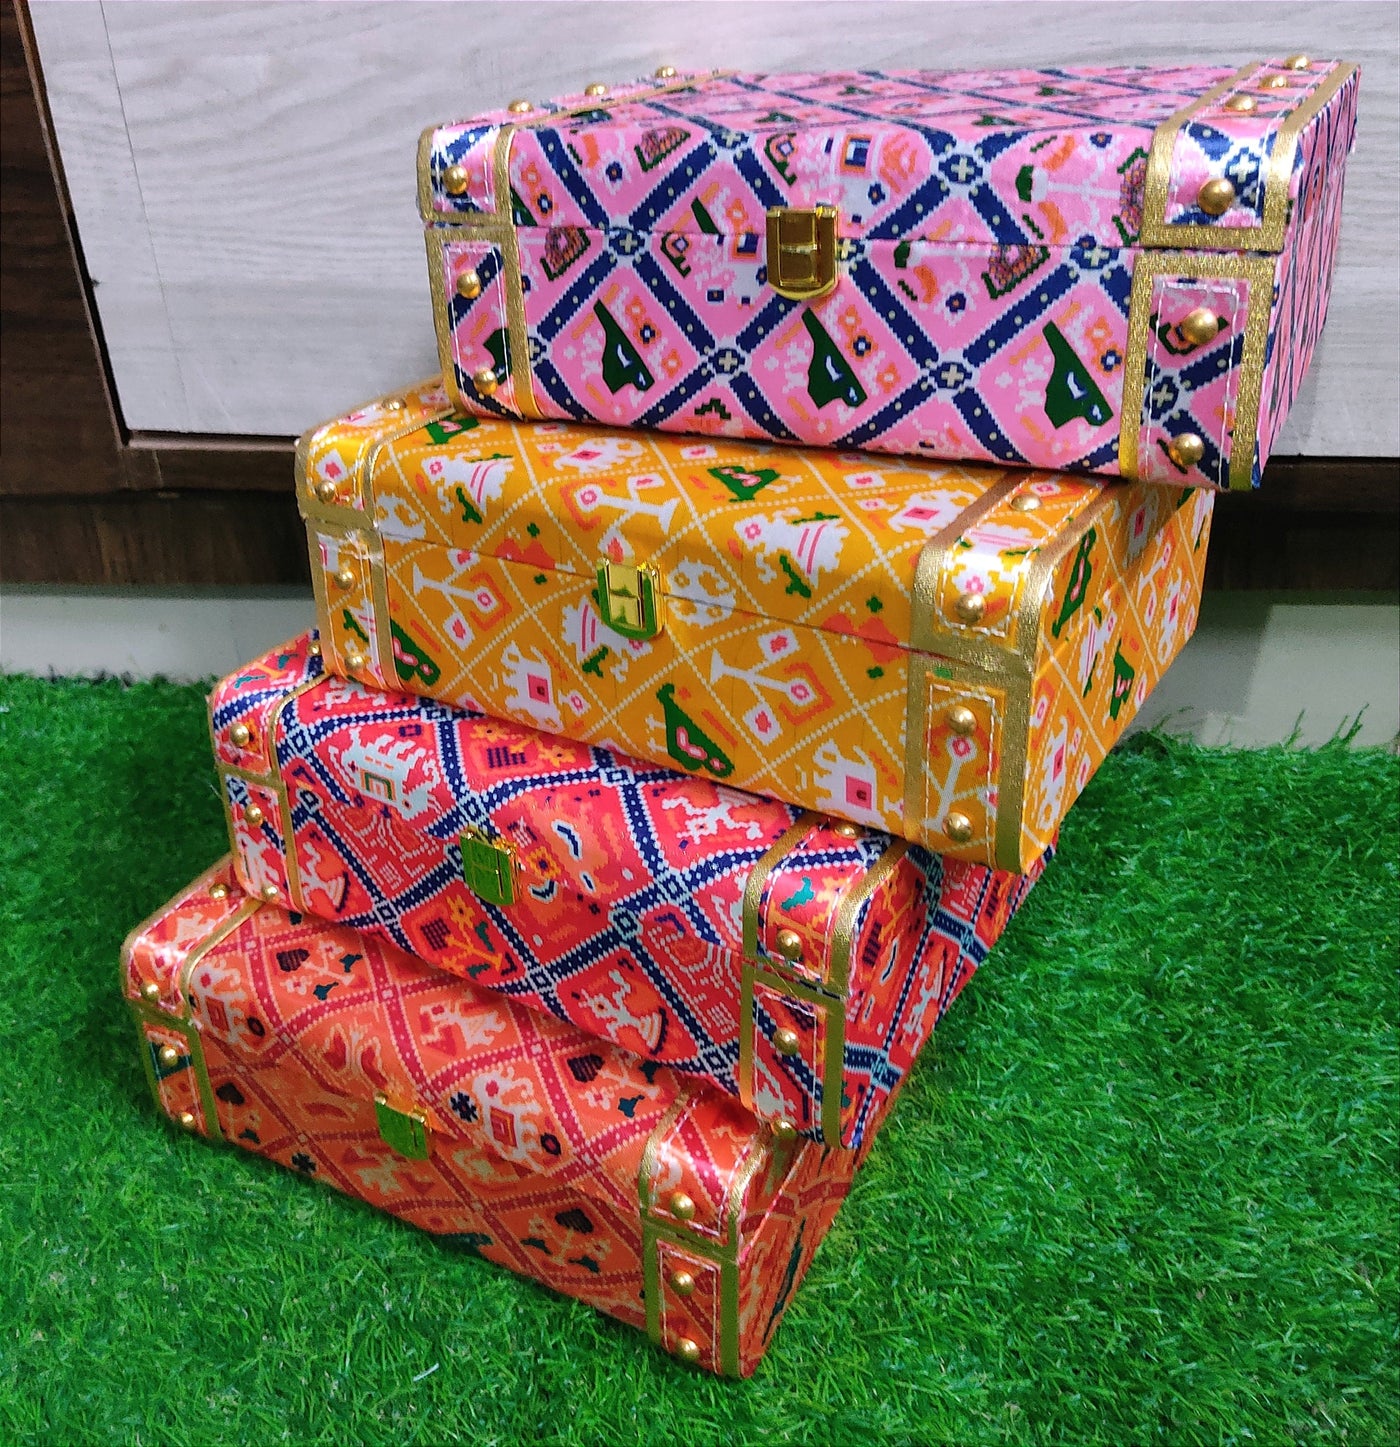 New Jaipur Handicraft gift trunk boxes LAMAMSH® (Size : 10*7*4.5 inch) leatherette Patola Print Trunk boxes / Gift boxes 🎁 fo wedding ceremony , birthday hampers , return gifts & giveaways